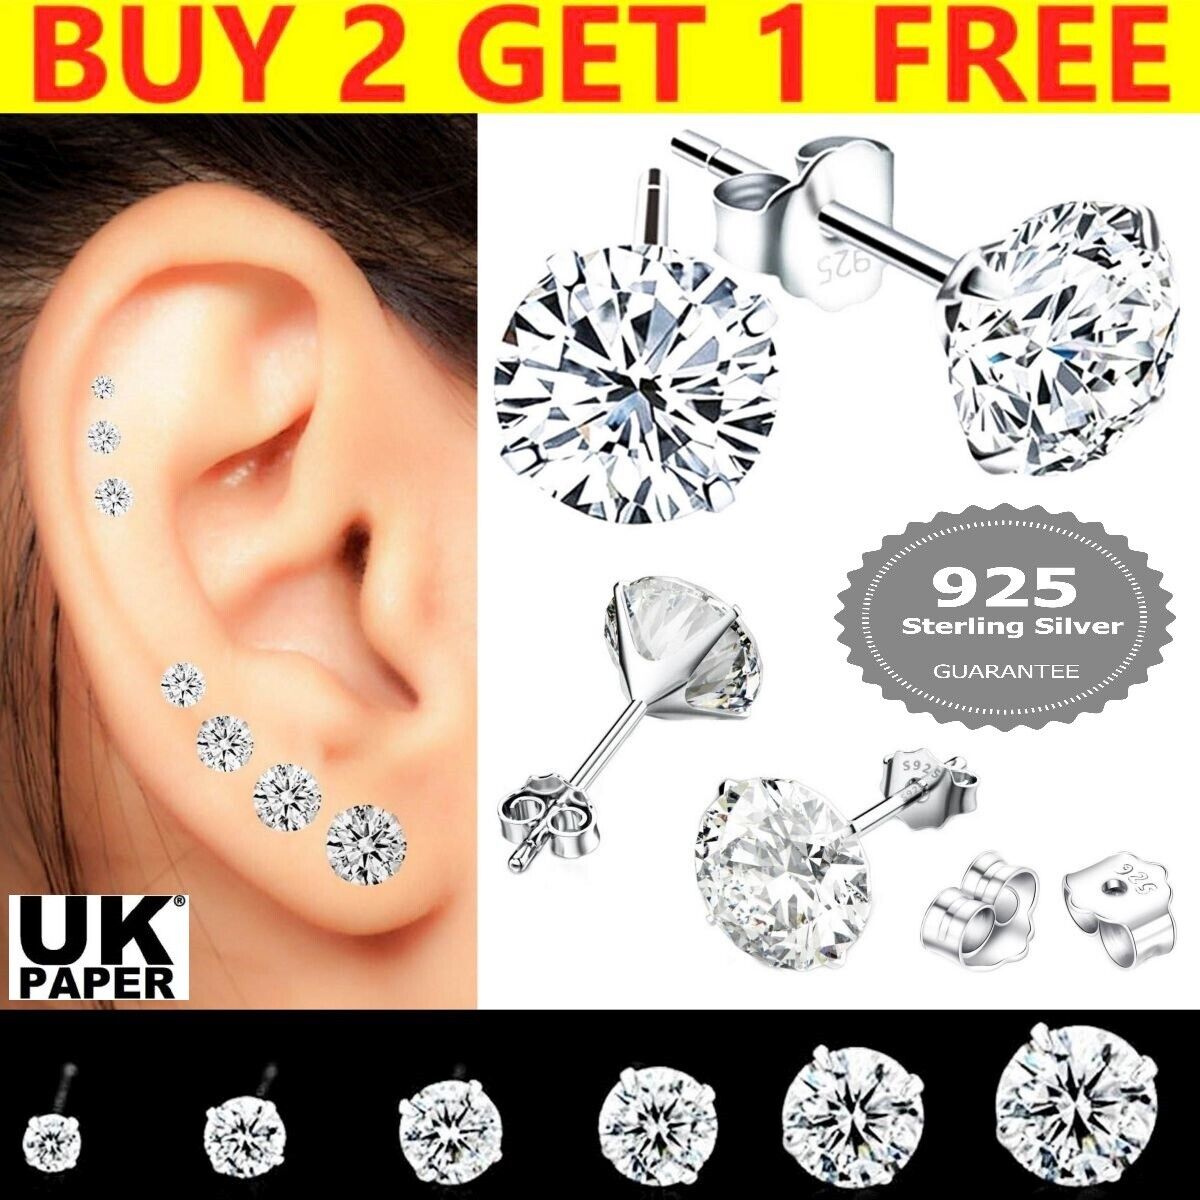 Genuine 925 Sterling Silver Cubic Zirconia Stud Earrings Small Round CZ Set Pack